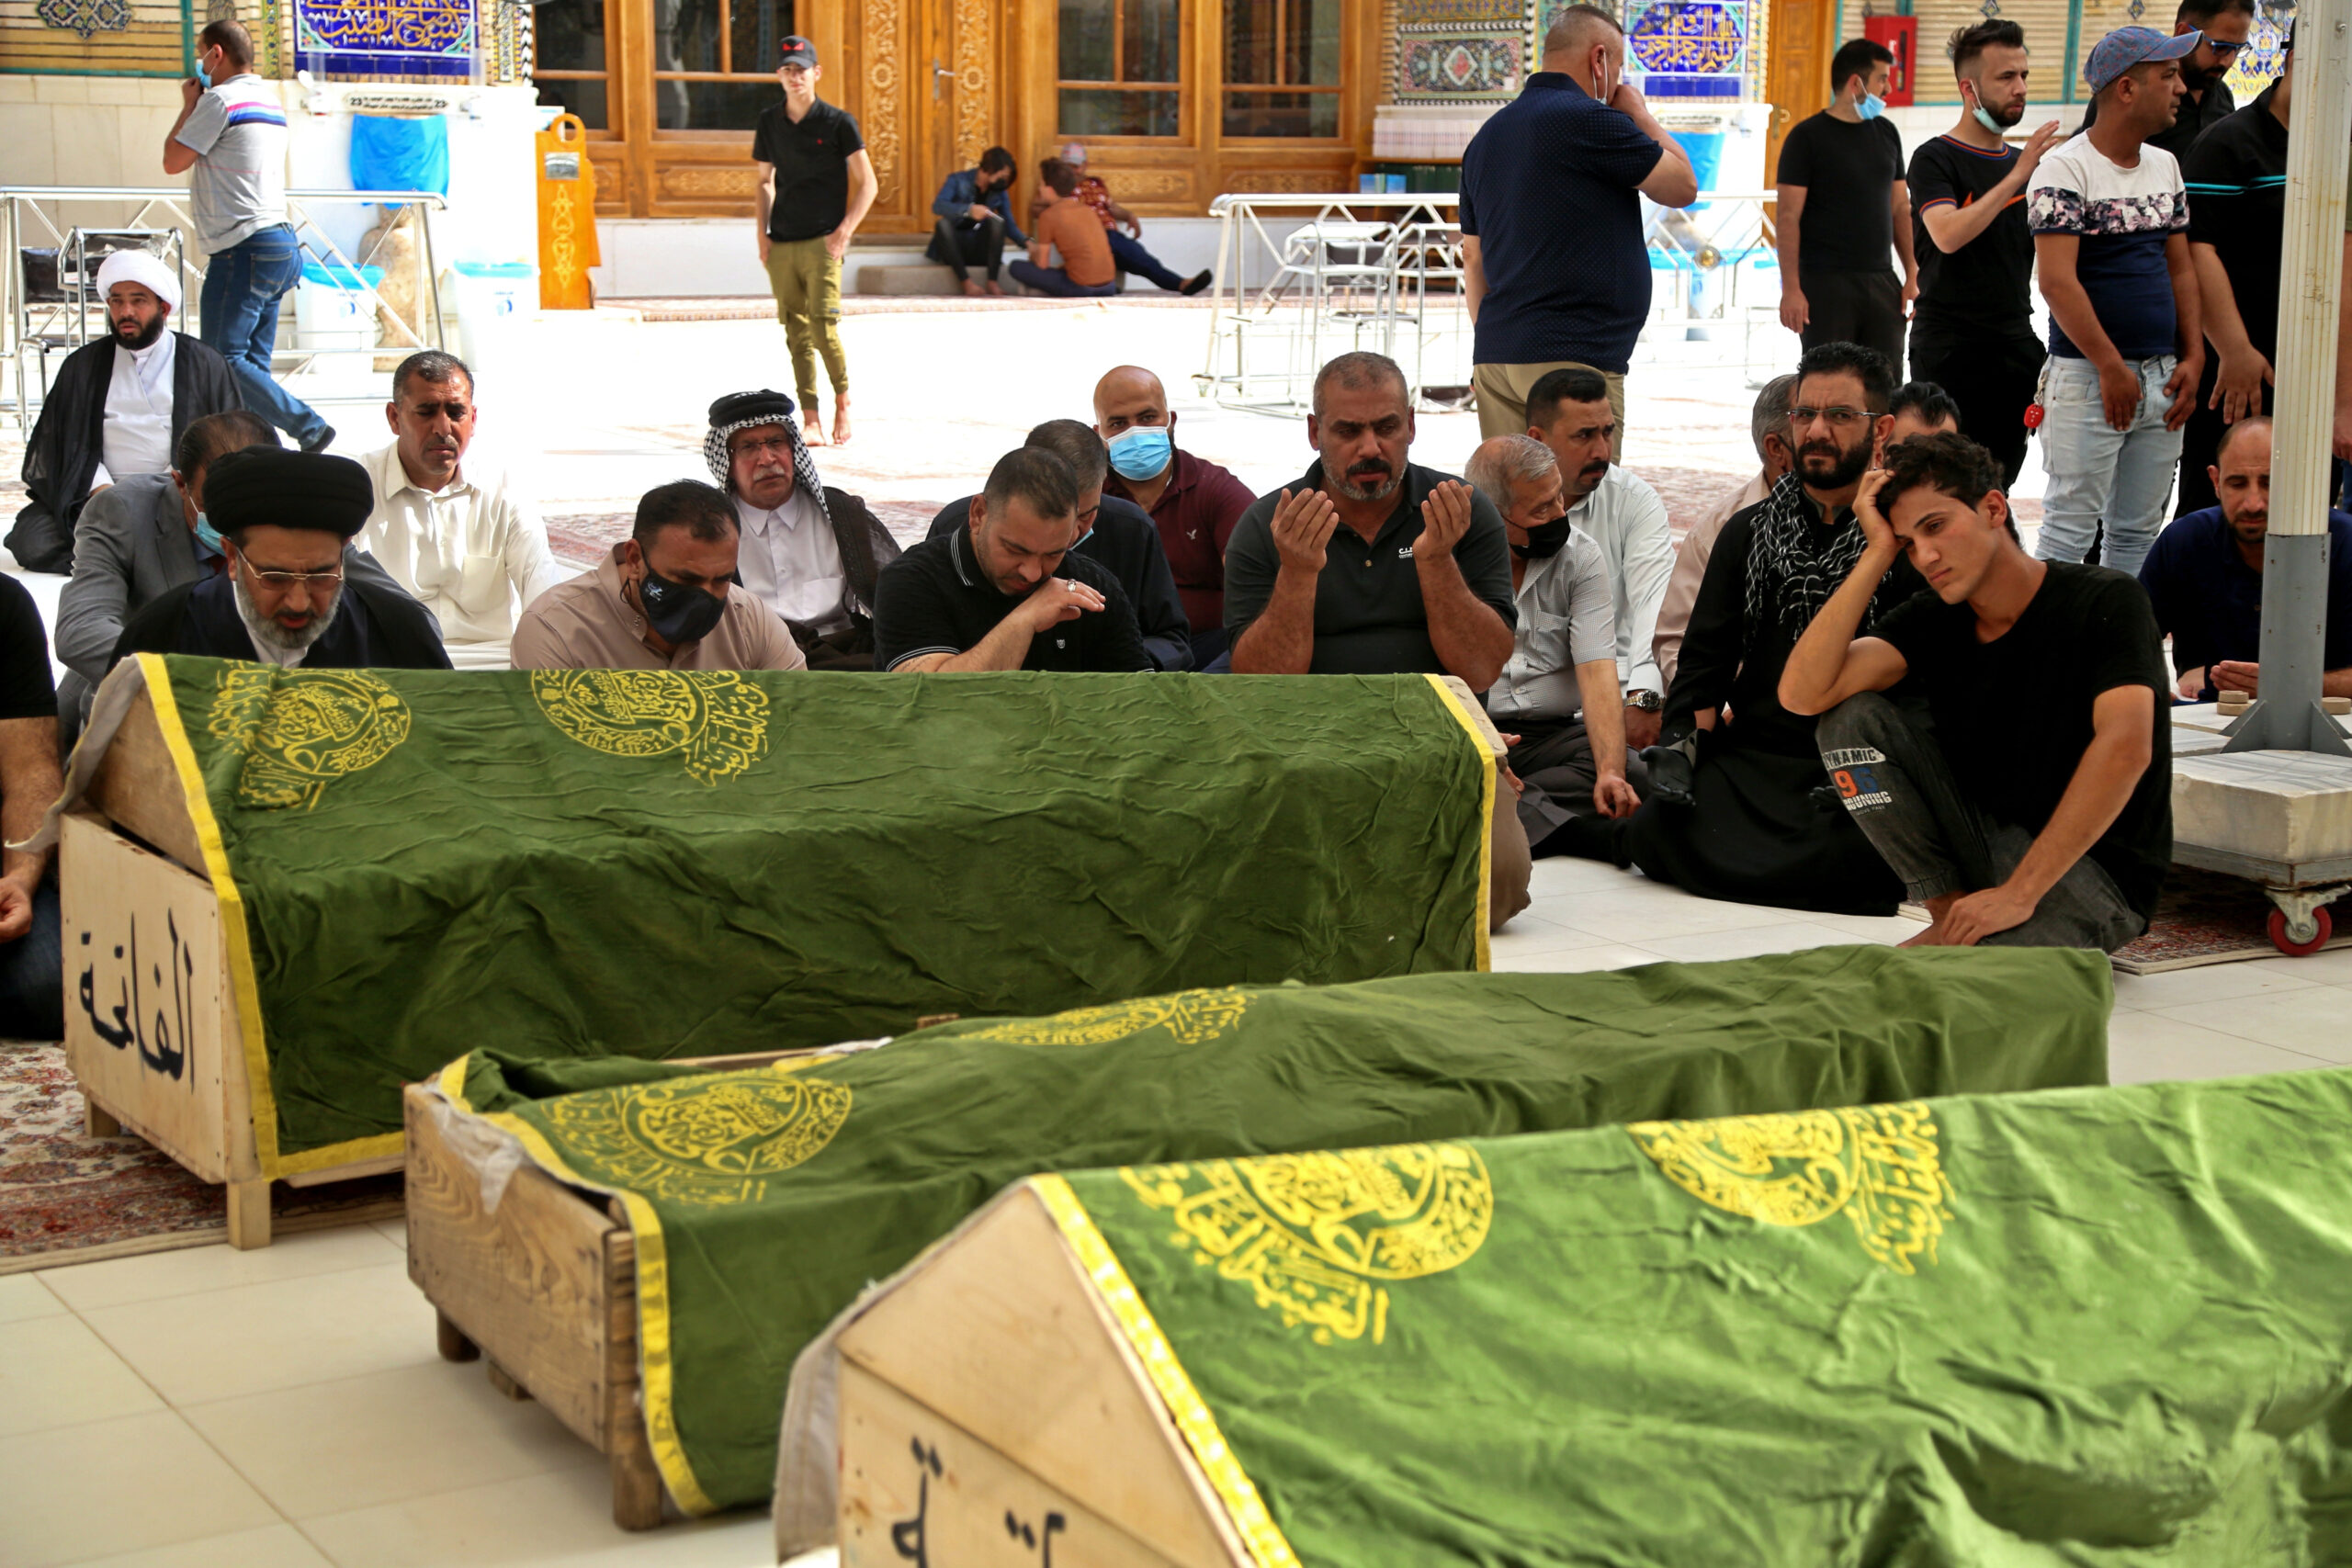 Mourners pray near the coffins of coronavirus patients who were killed in a hospital fire, during their funeral at the Imam Ali shrine in Najaf, Iraq, Sunday, April 25, 2021. Iraq’s Interior Ministry said Sunday that over 80 people died and over 100 were injured in a catastrophic fire that broke out in the intensive care unit of a Baghdad hospital tending to severe coronavirus patients in the early morning Sunday. (AP Photo/Anmar Khalil)